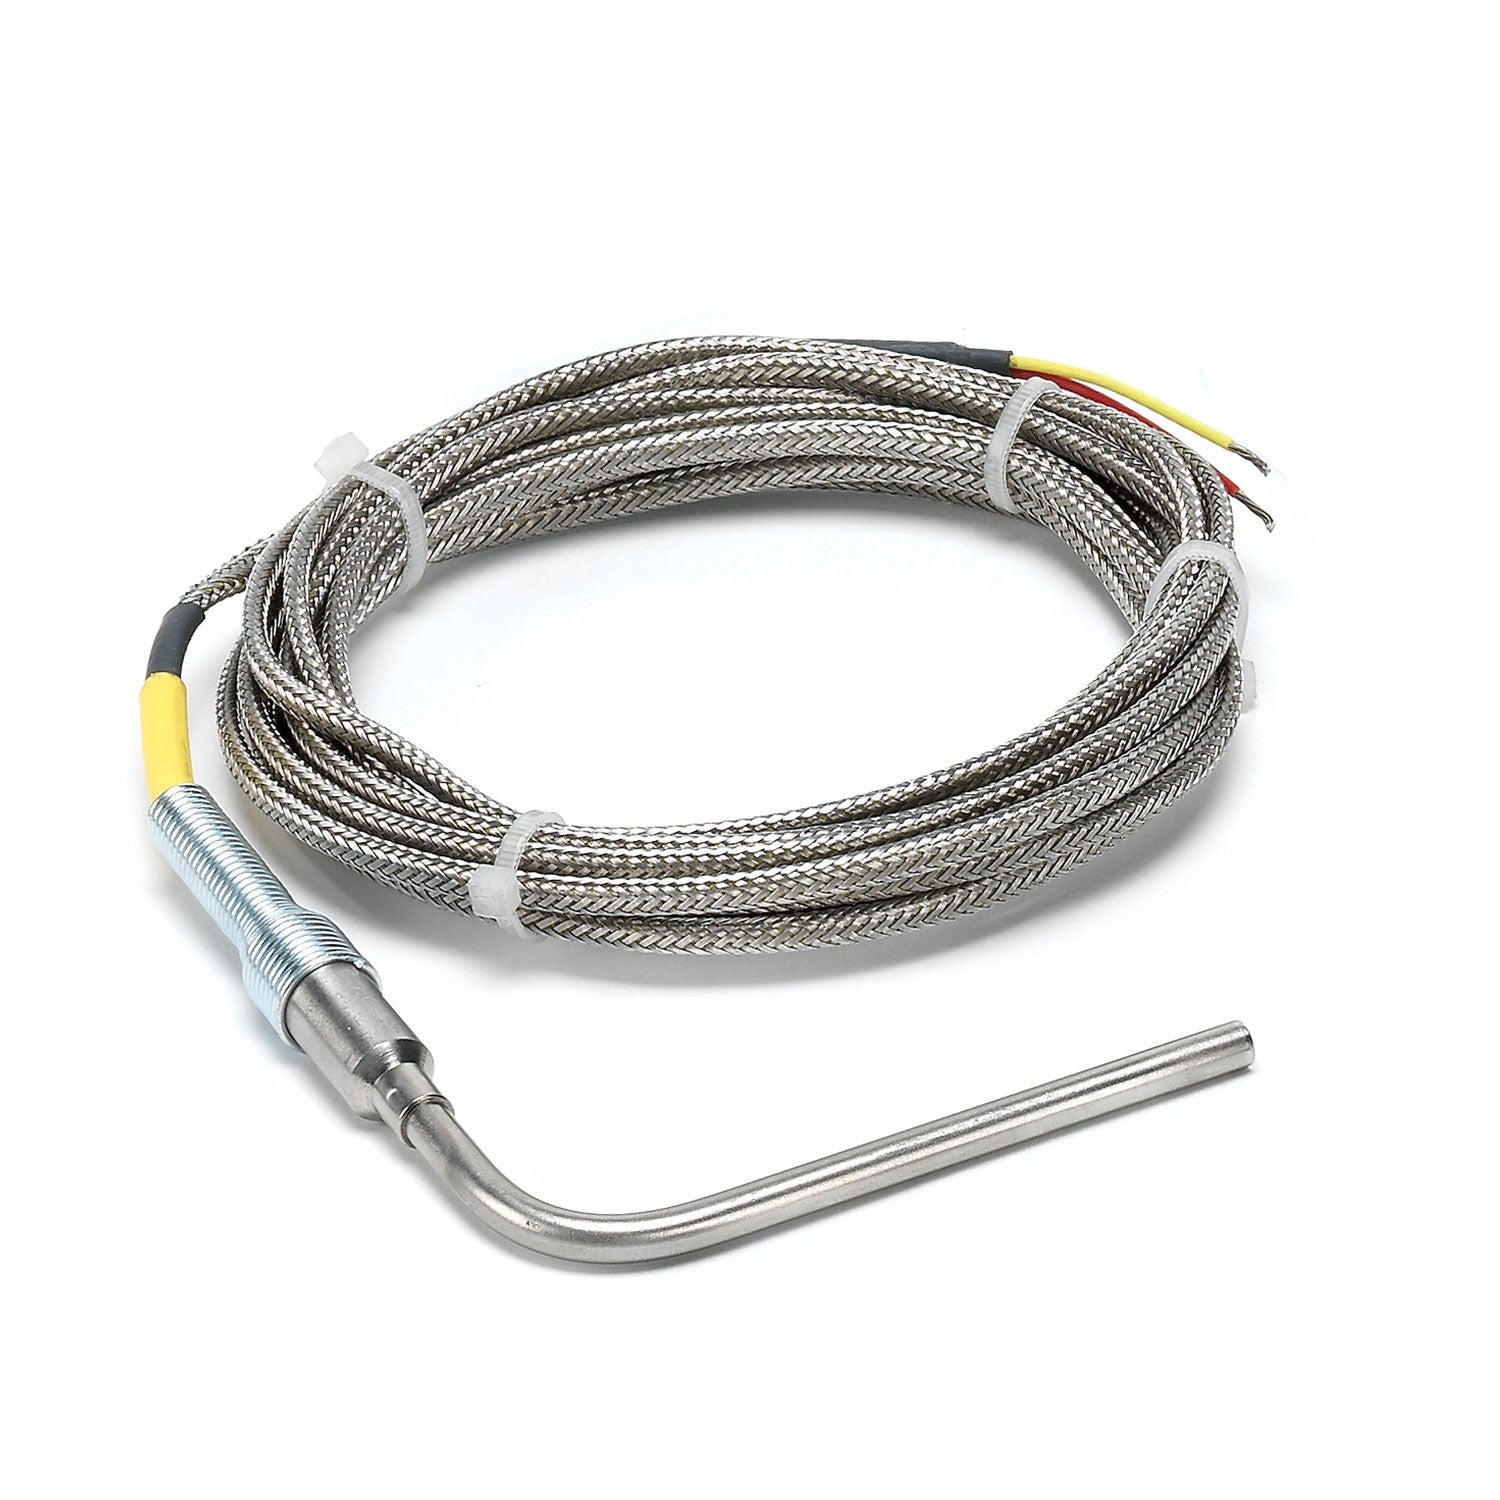 FTCK Series Type K Thermocouples MIMS Class A, Standard Sizes and Lengths, Braided SS/Fibreglass/Teflon Tail, 304 Stainless Steel Sheath, CE ANSI ROHS Approved, -20 to 700 Deg C